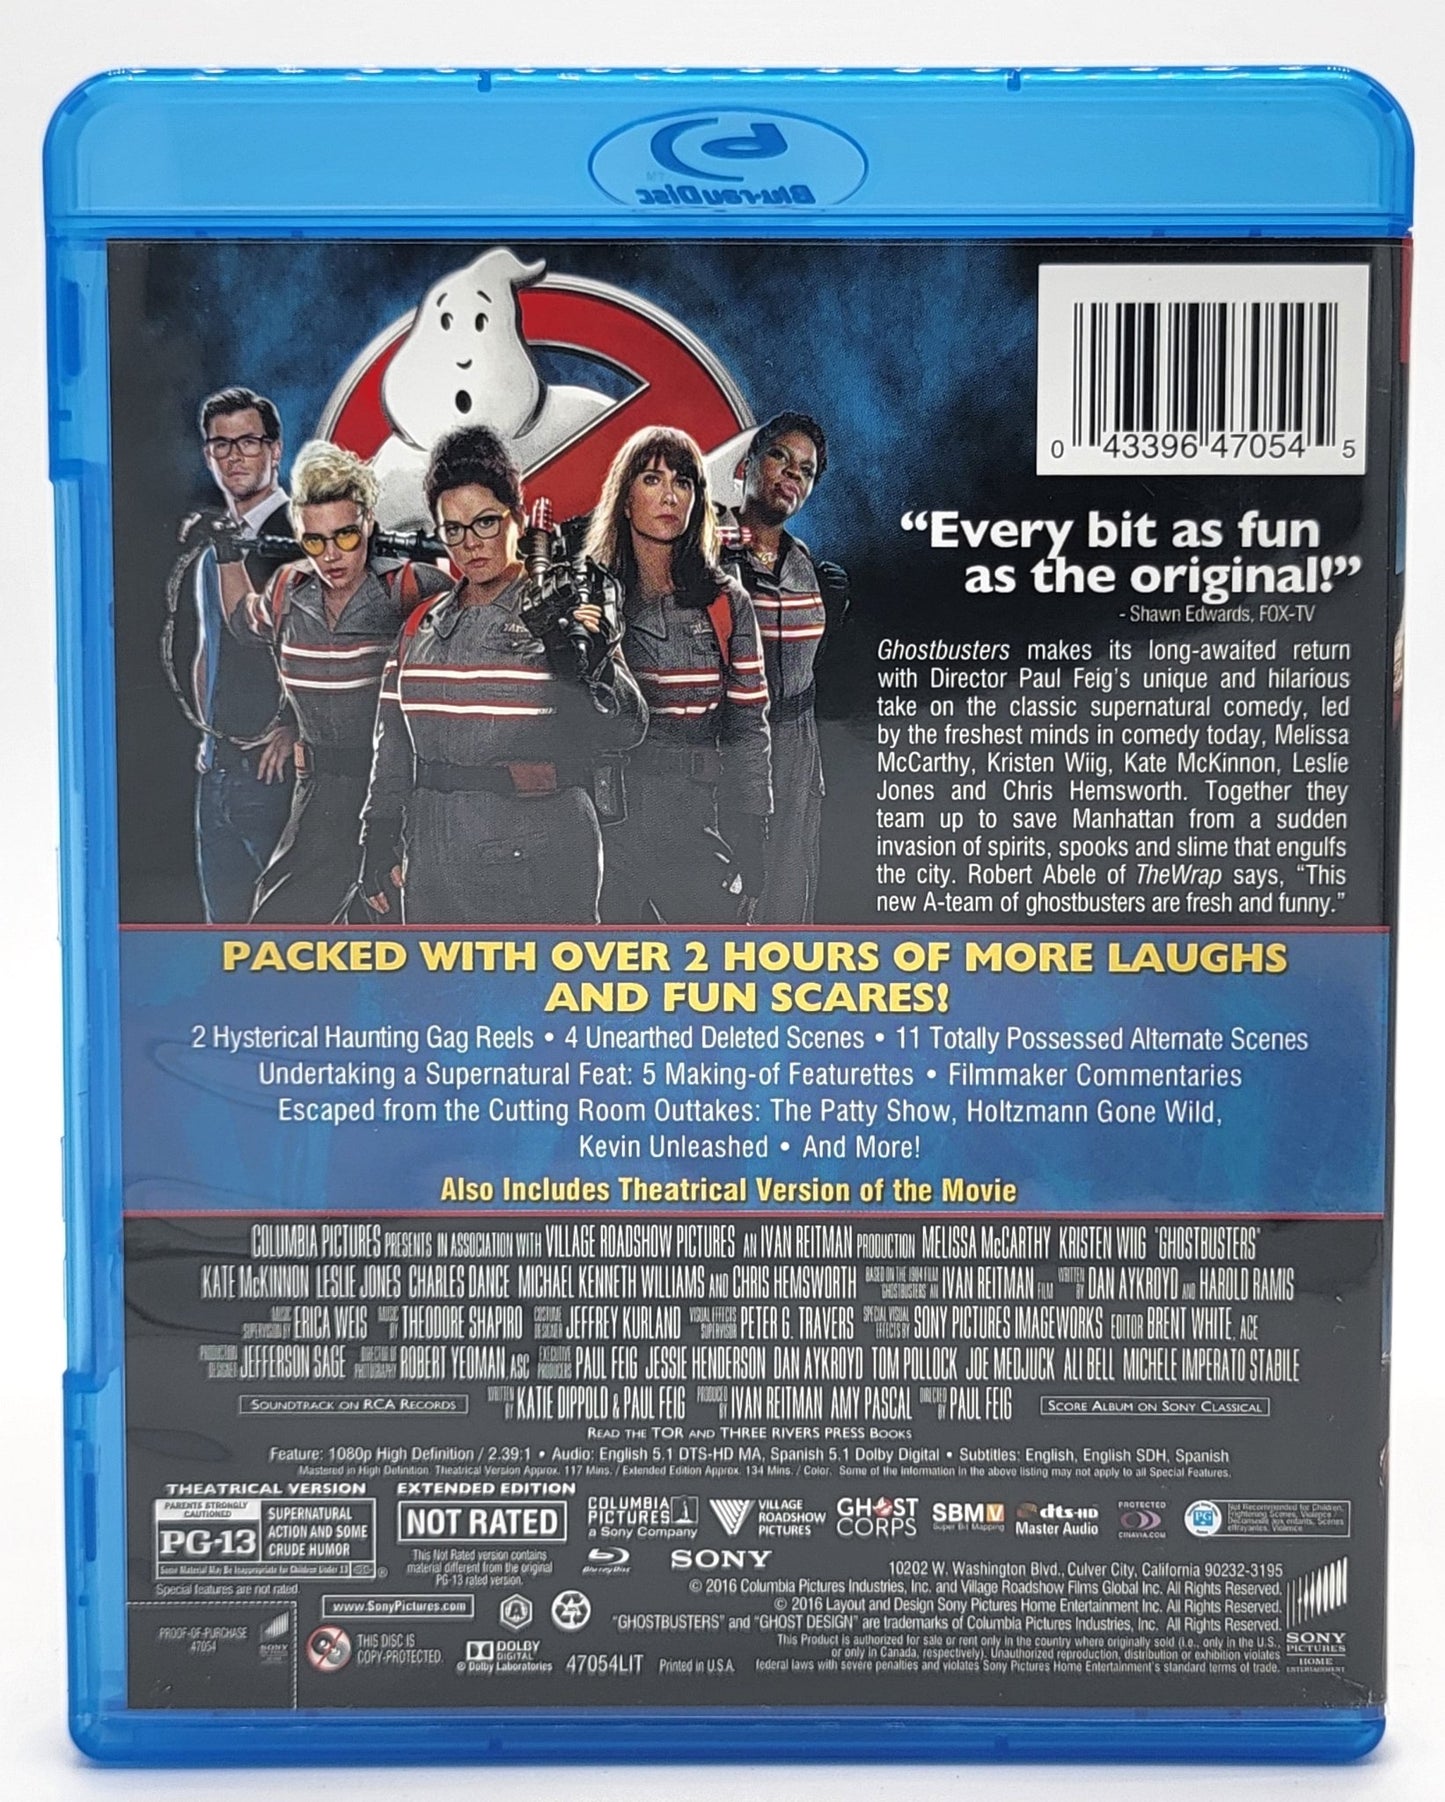 Columbia Pictures - Ghostbusters Answer the Call Extended Edition Also includes Theatrical Version - Blu-ray - Steady Bunny Shop